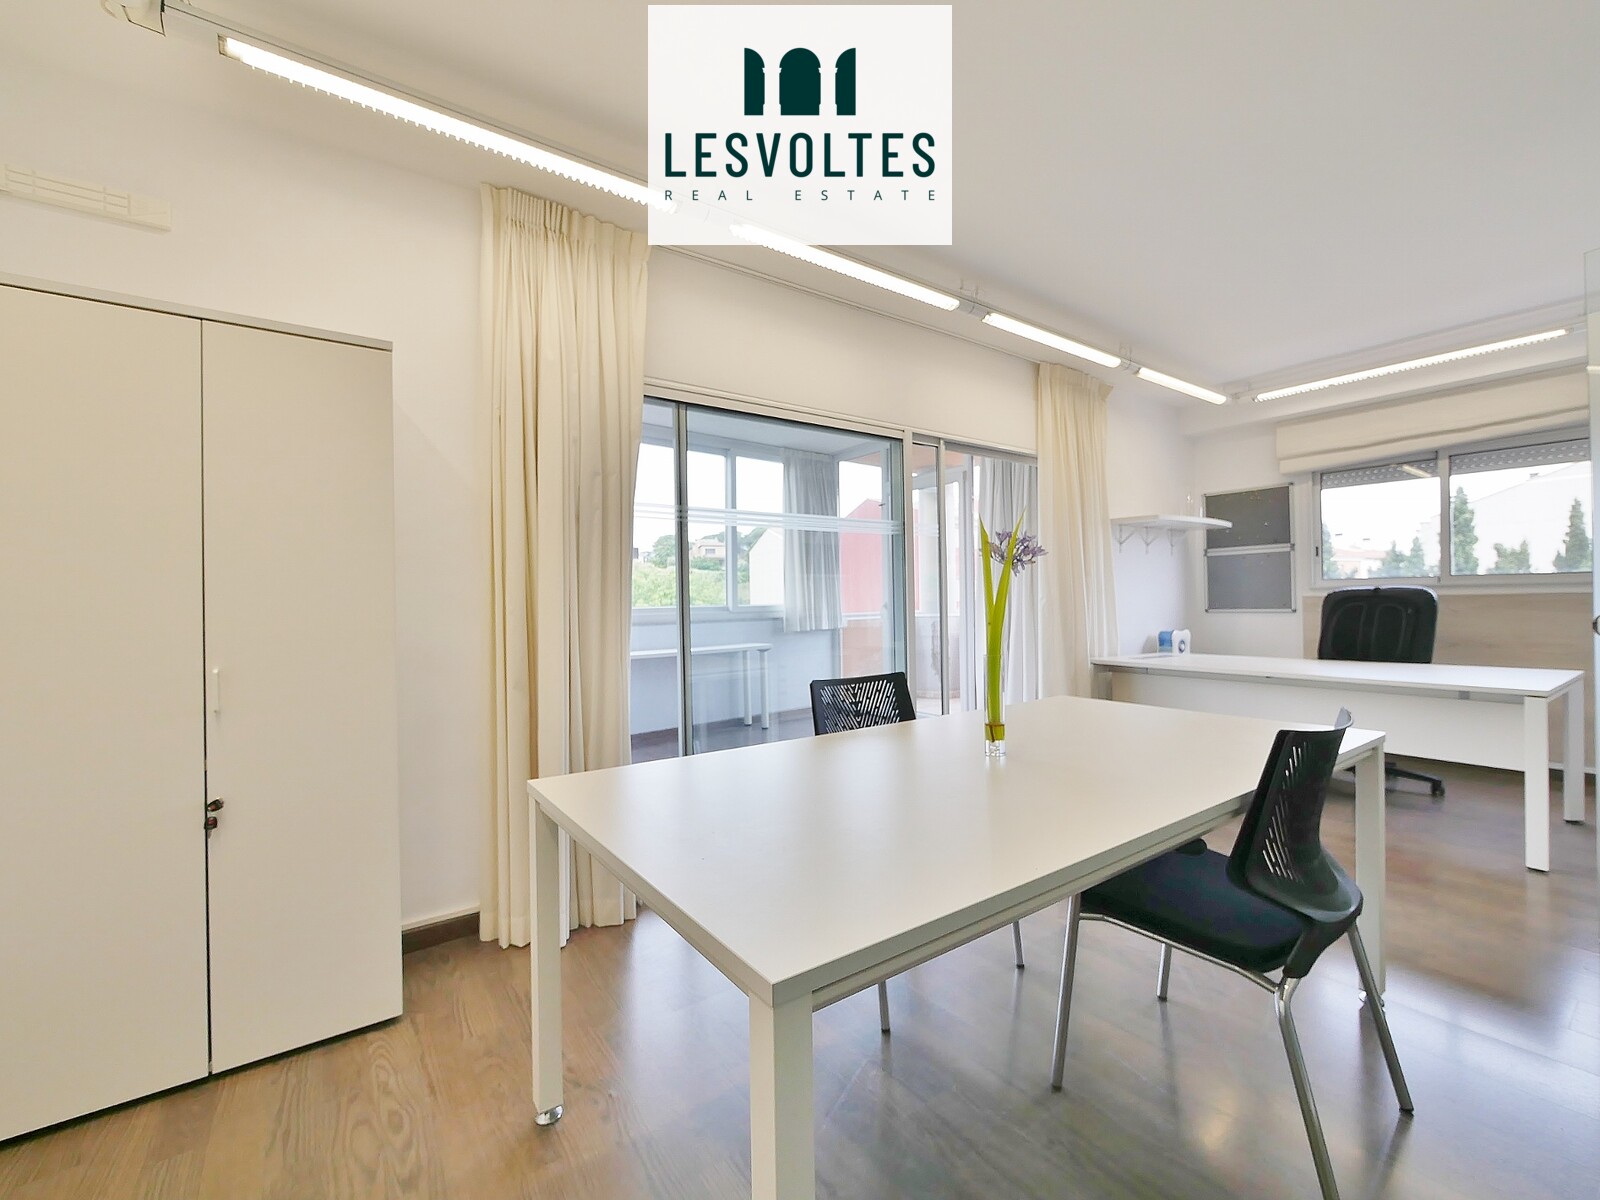 PROFESSIONAL OFFICE OF 175 M2 ON THE SECOND FLOOR WITH ELEVATOR FOR RENT IN PALAFRUGELL